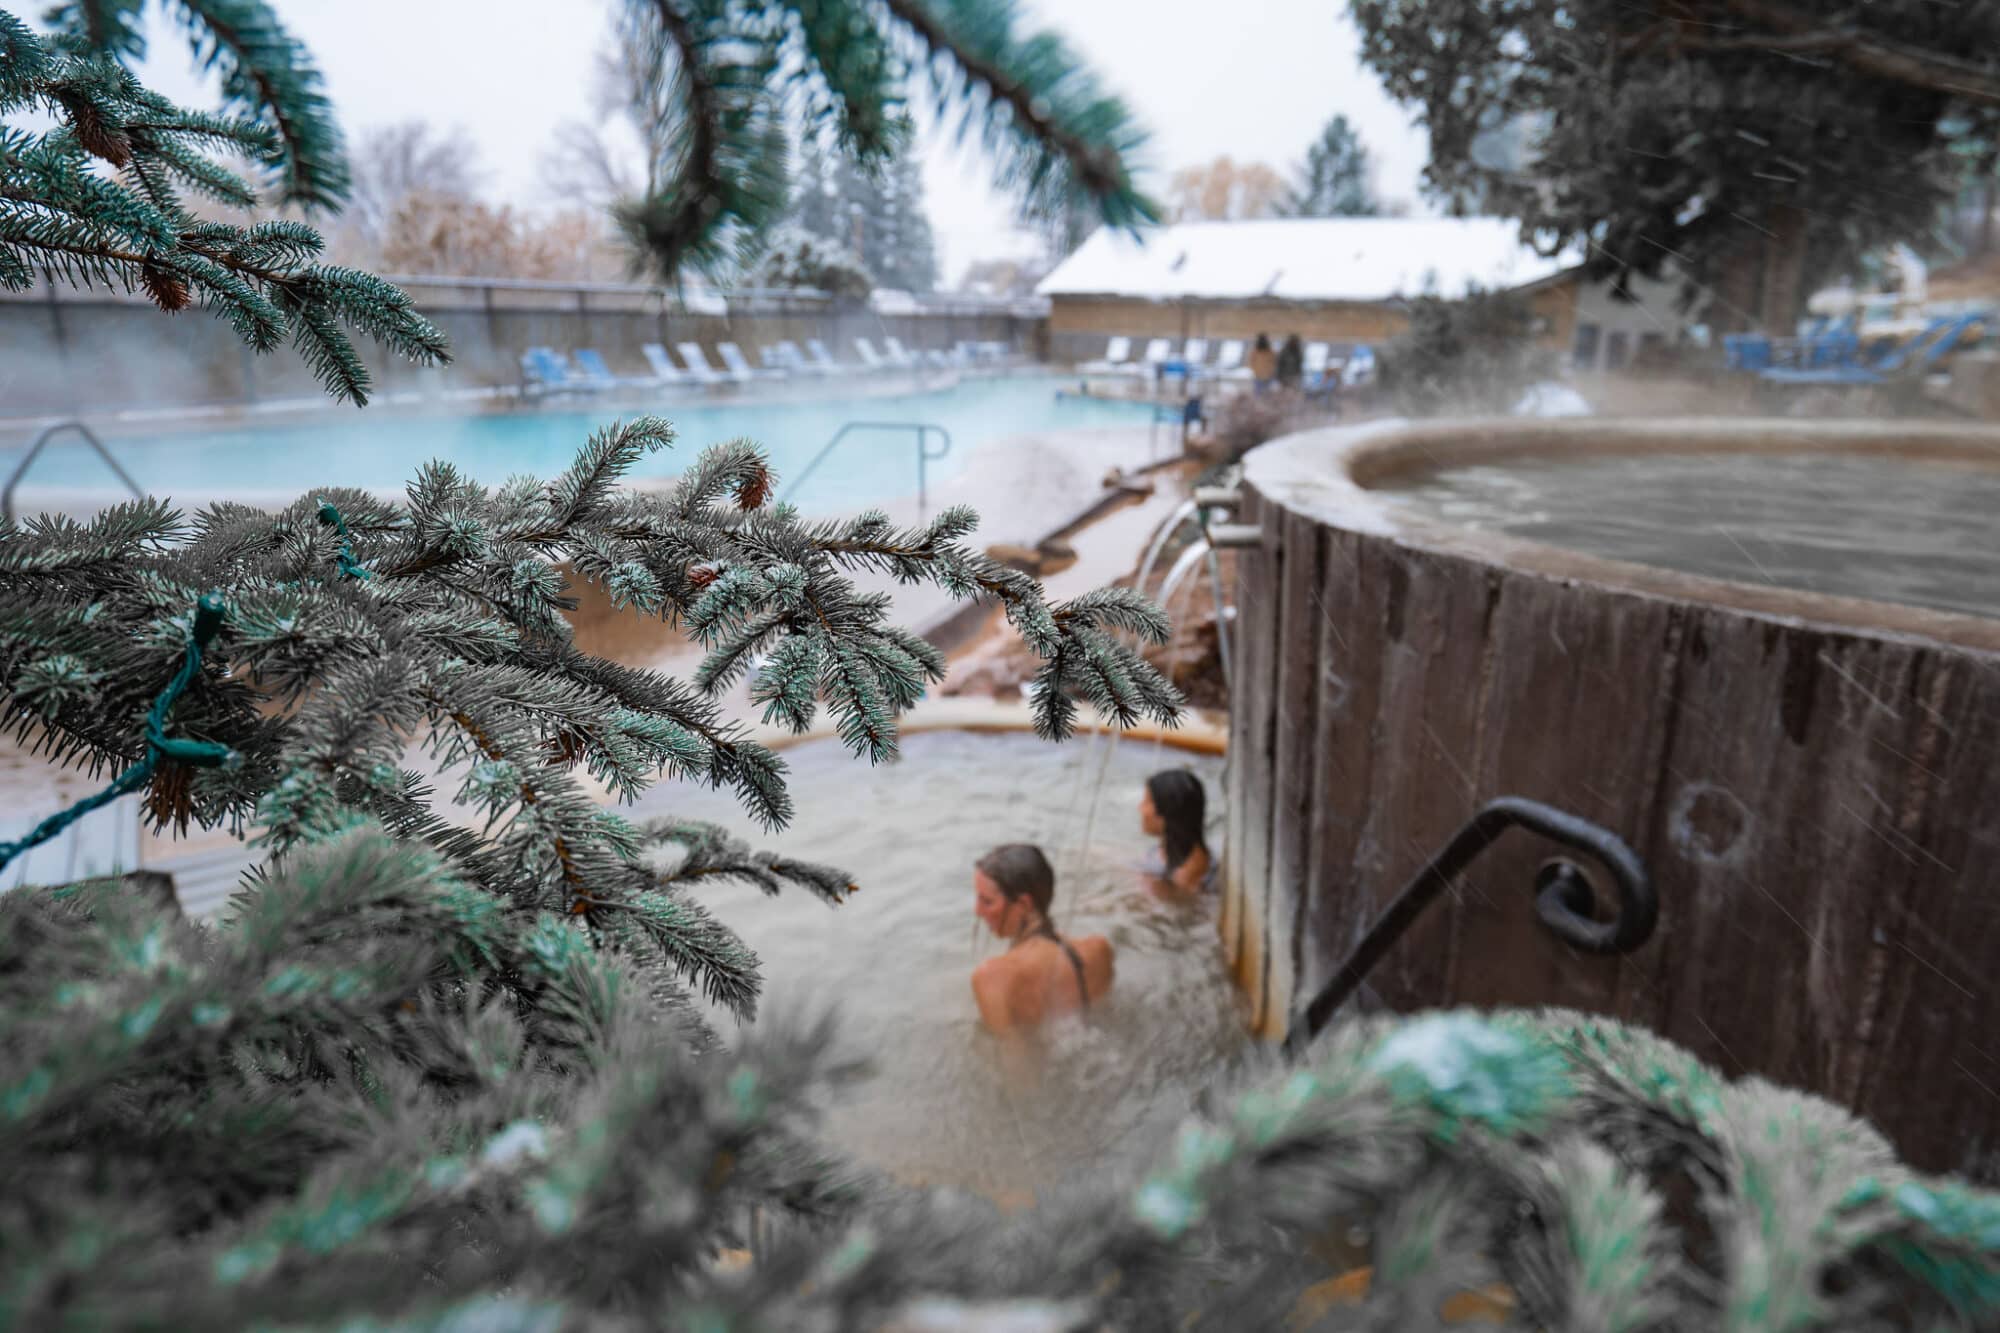 Two women soak in a warm pool as water cascades around them at Durango Hot Springs resort